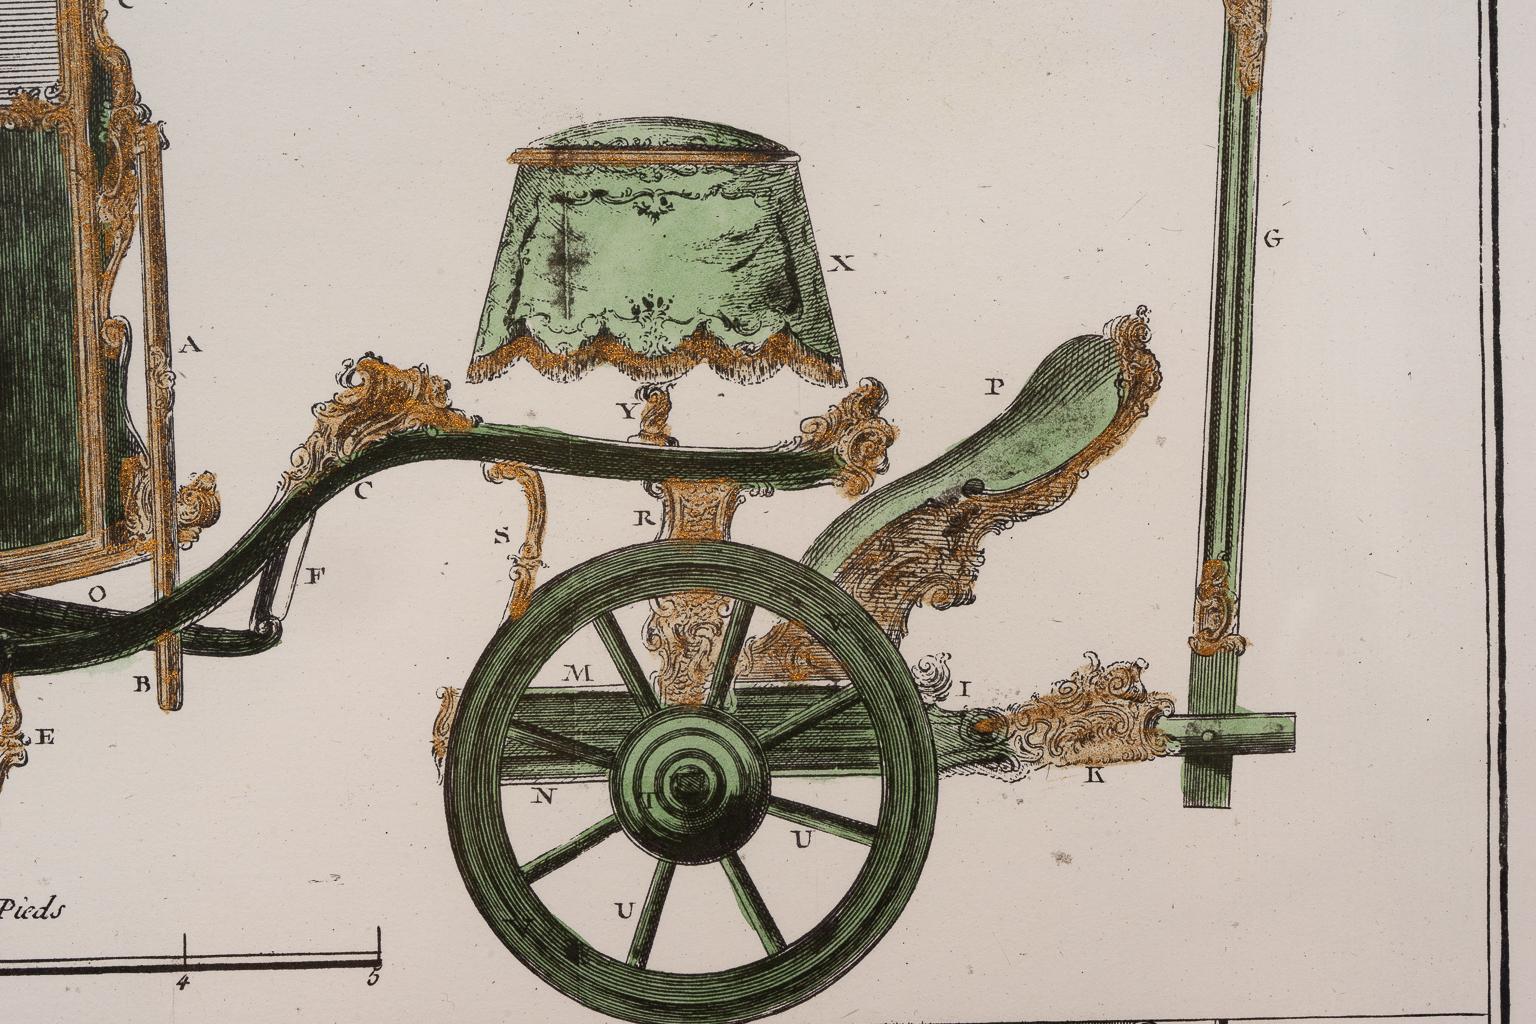 Glazed Hand Colored French Engraving of Carriage